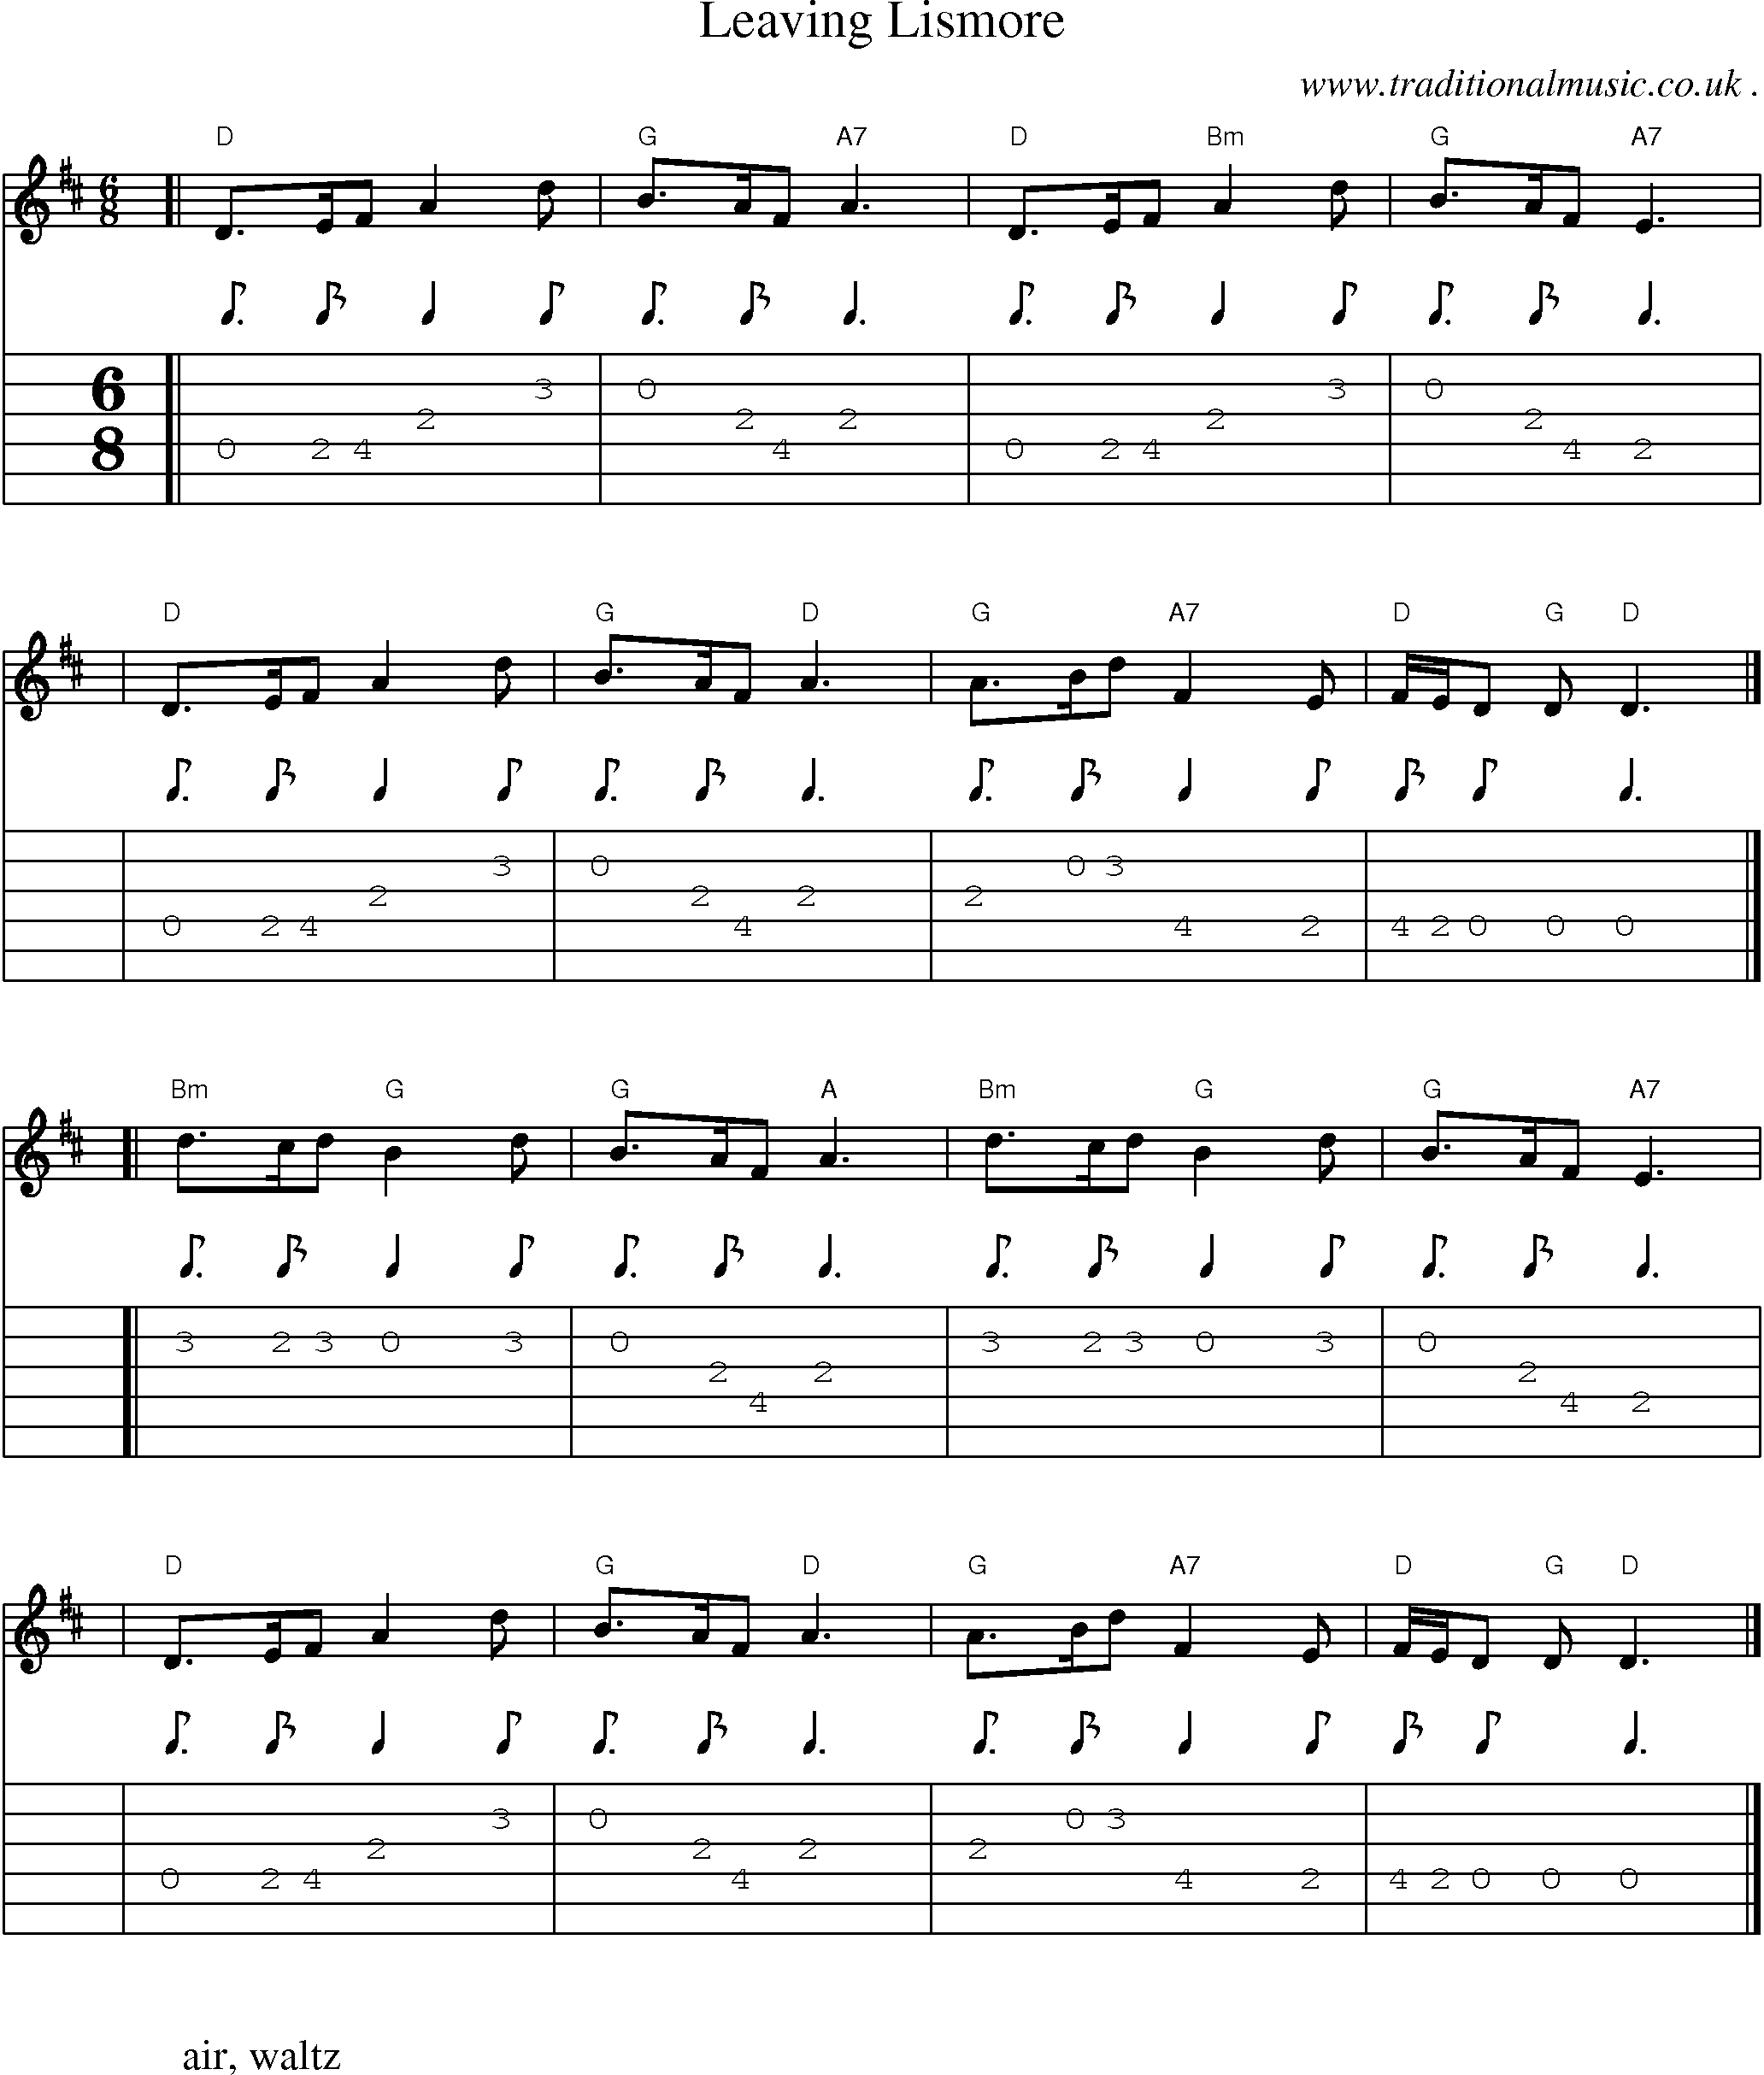 Sheet-music  score, Chords and Guitar Tabs for Leaving Lismore